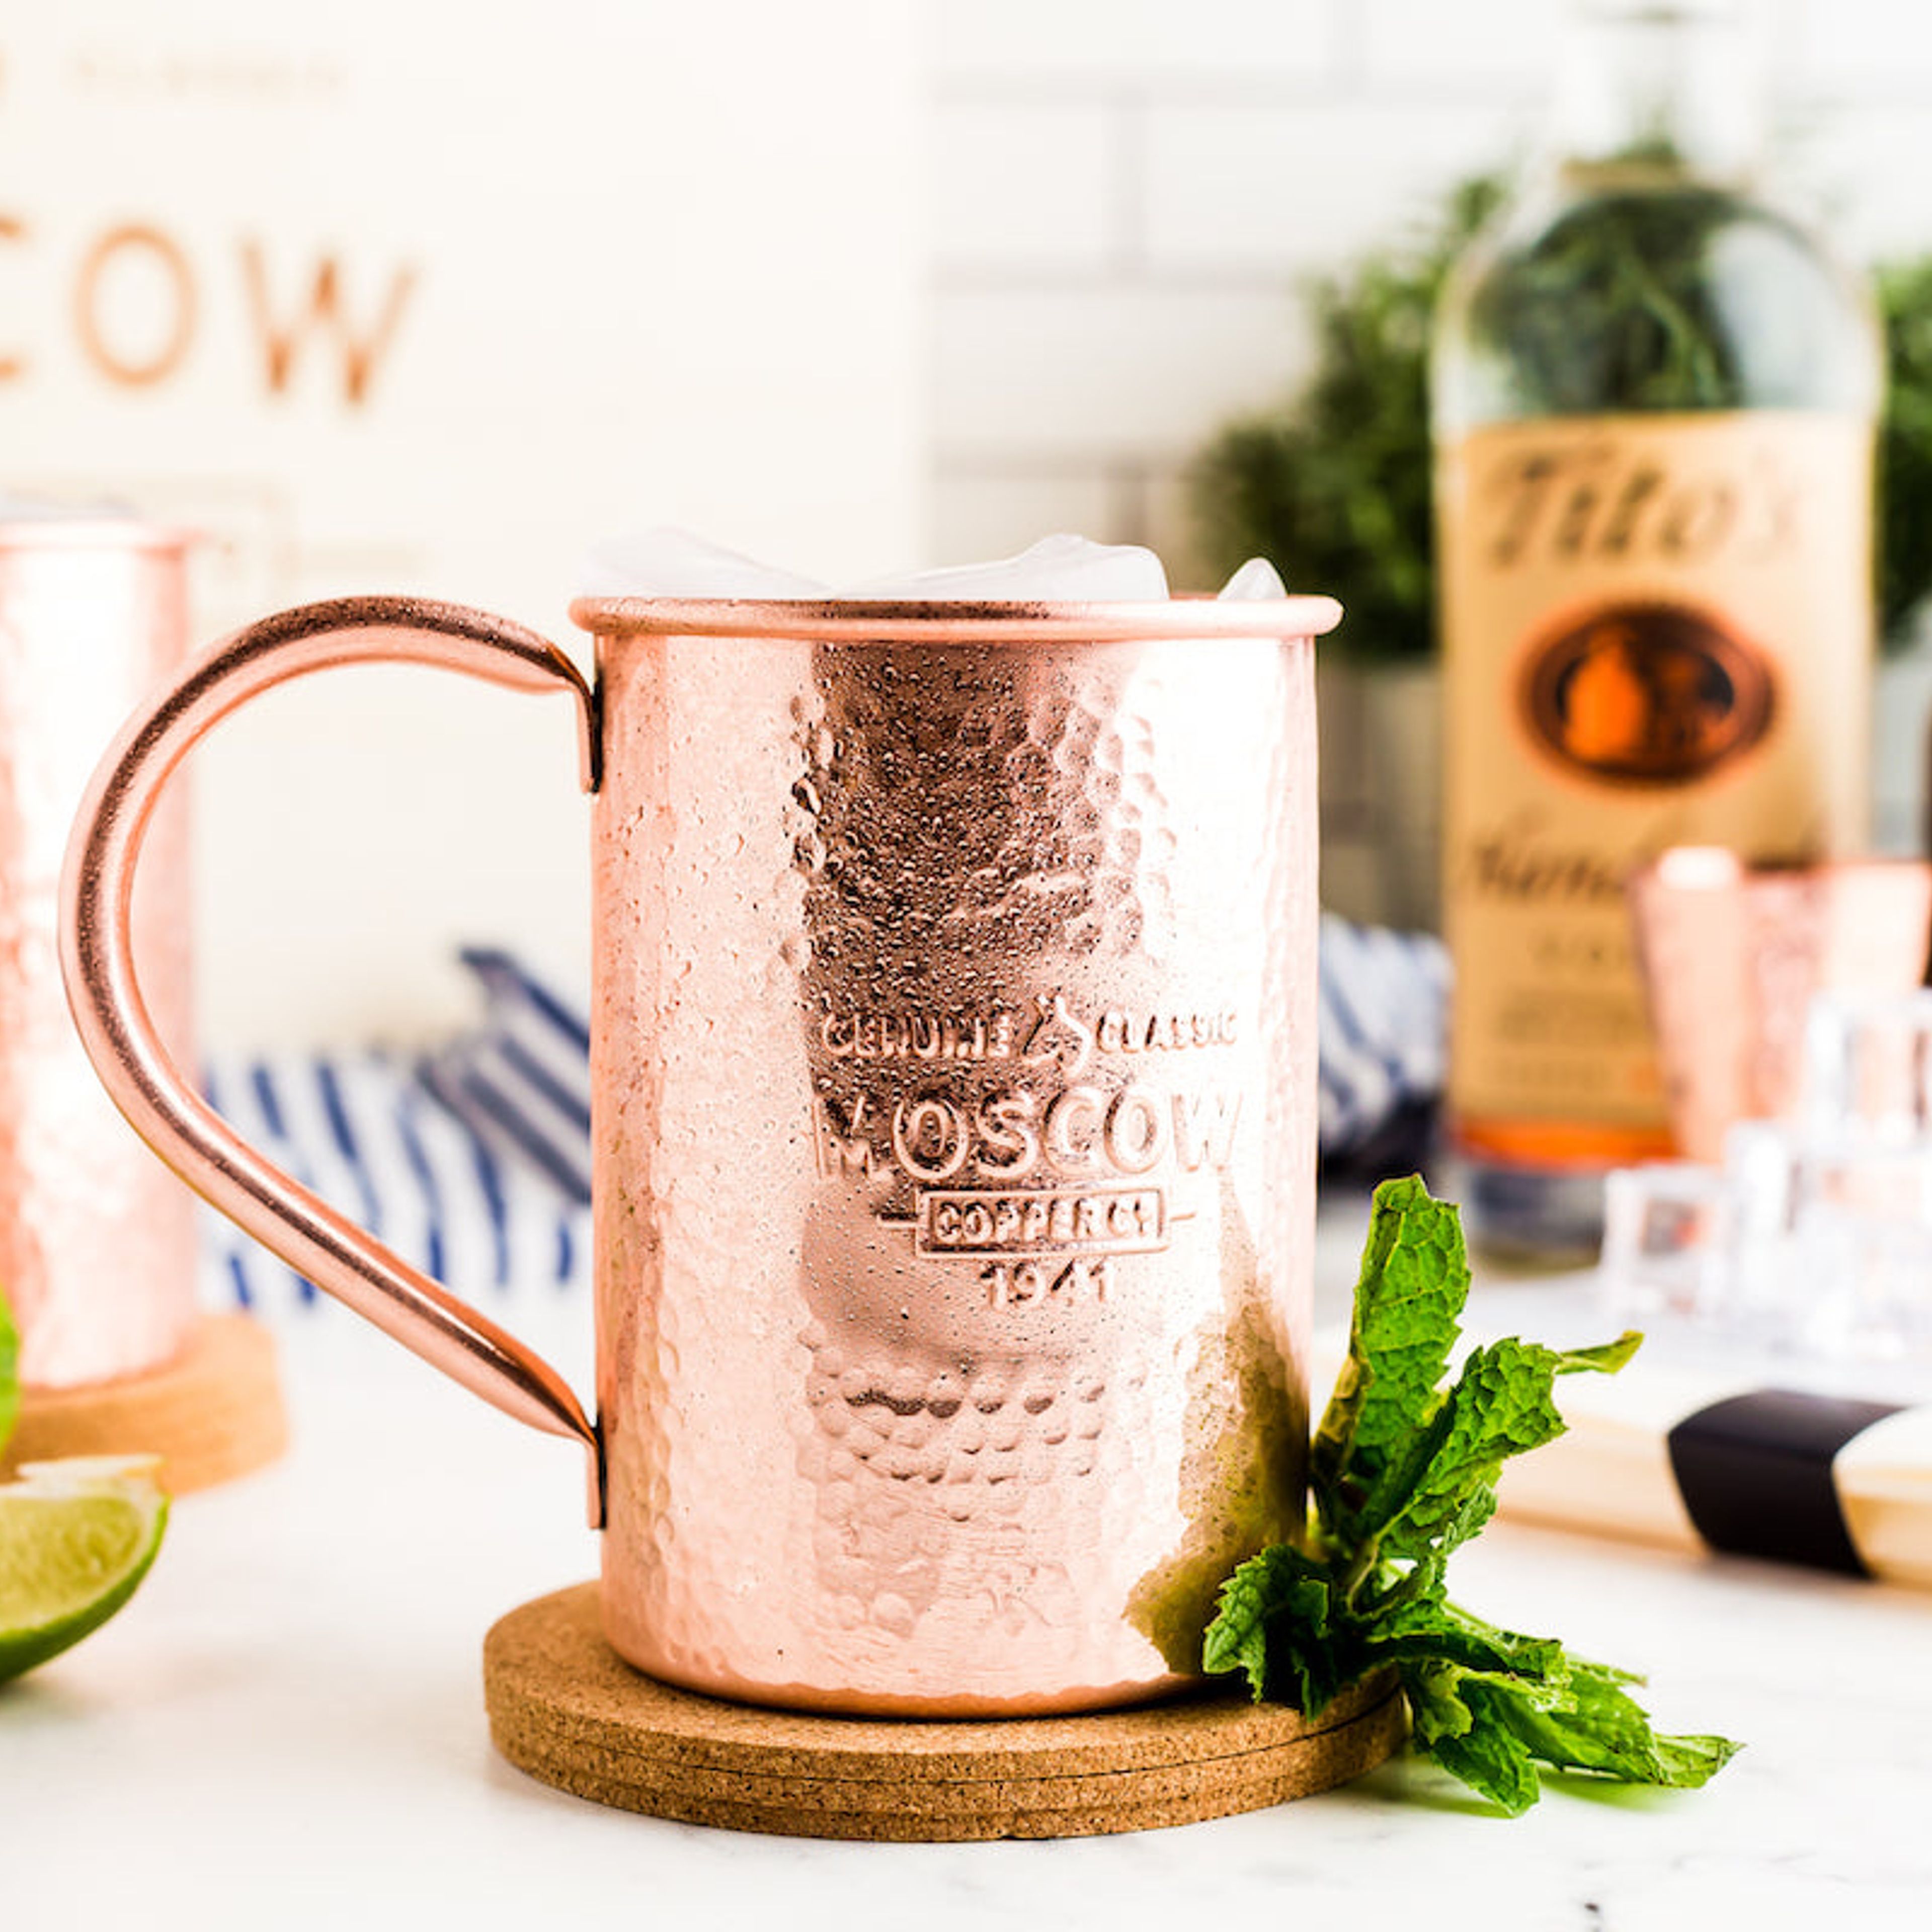 Moscow Mule Anniversary Gift Set